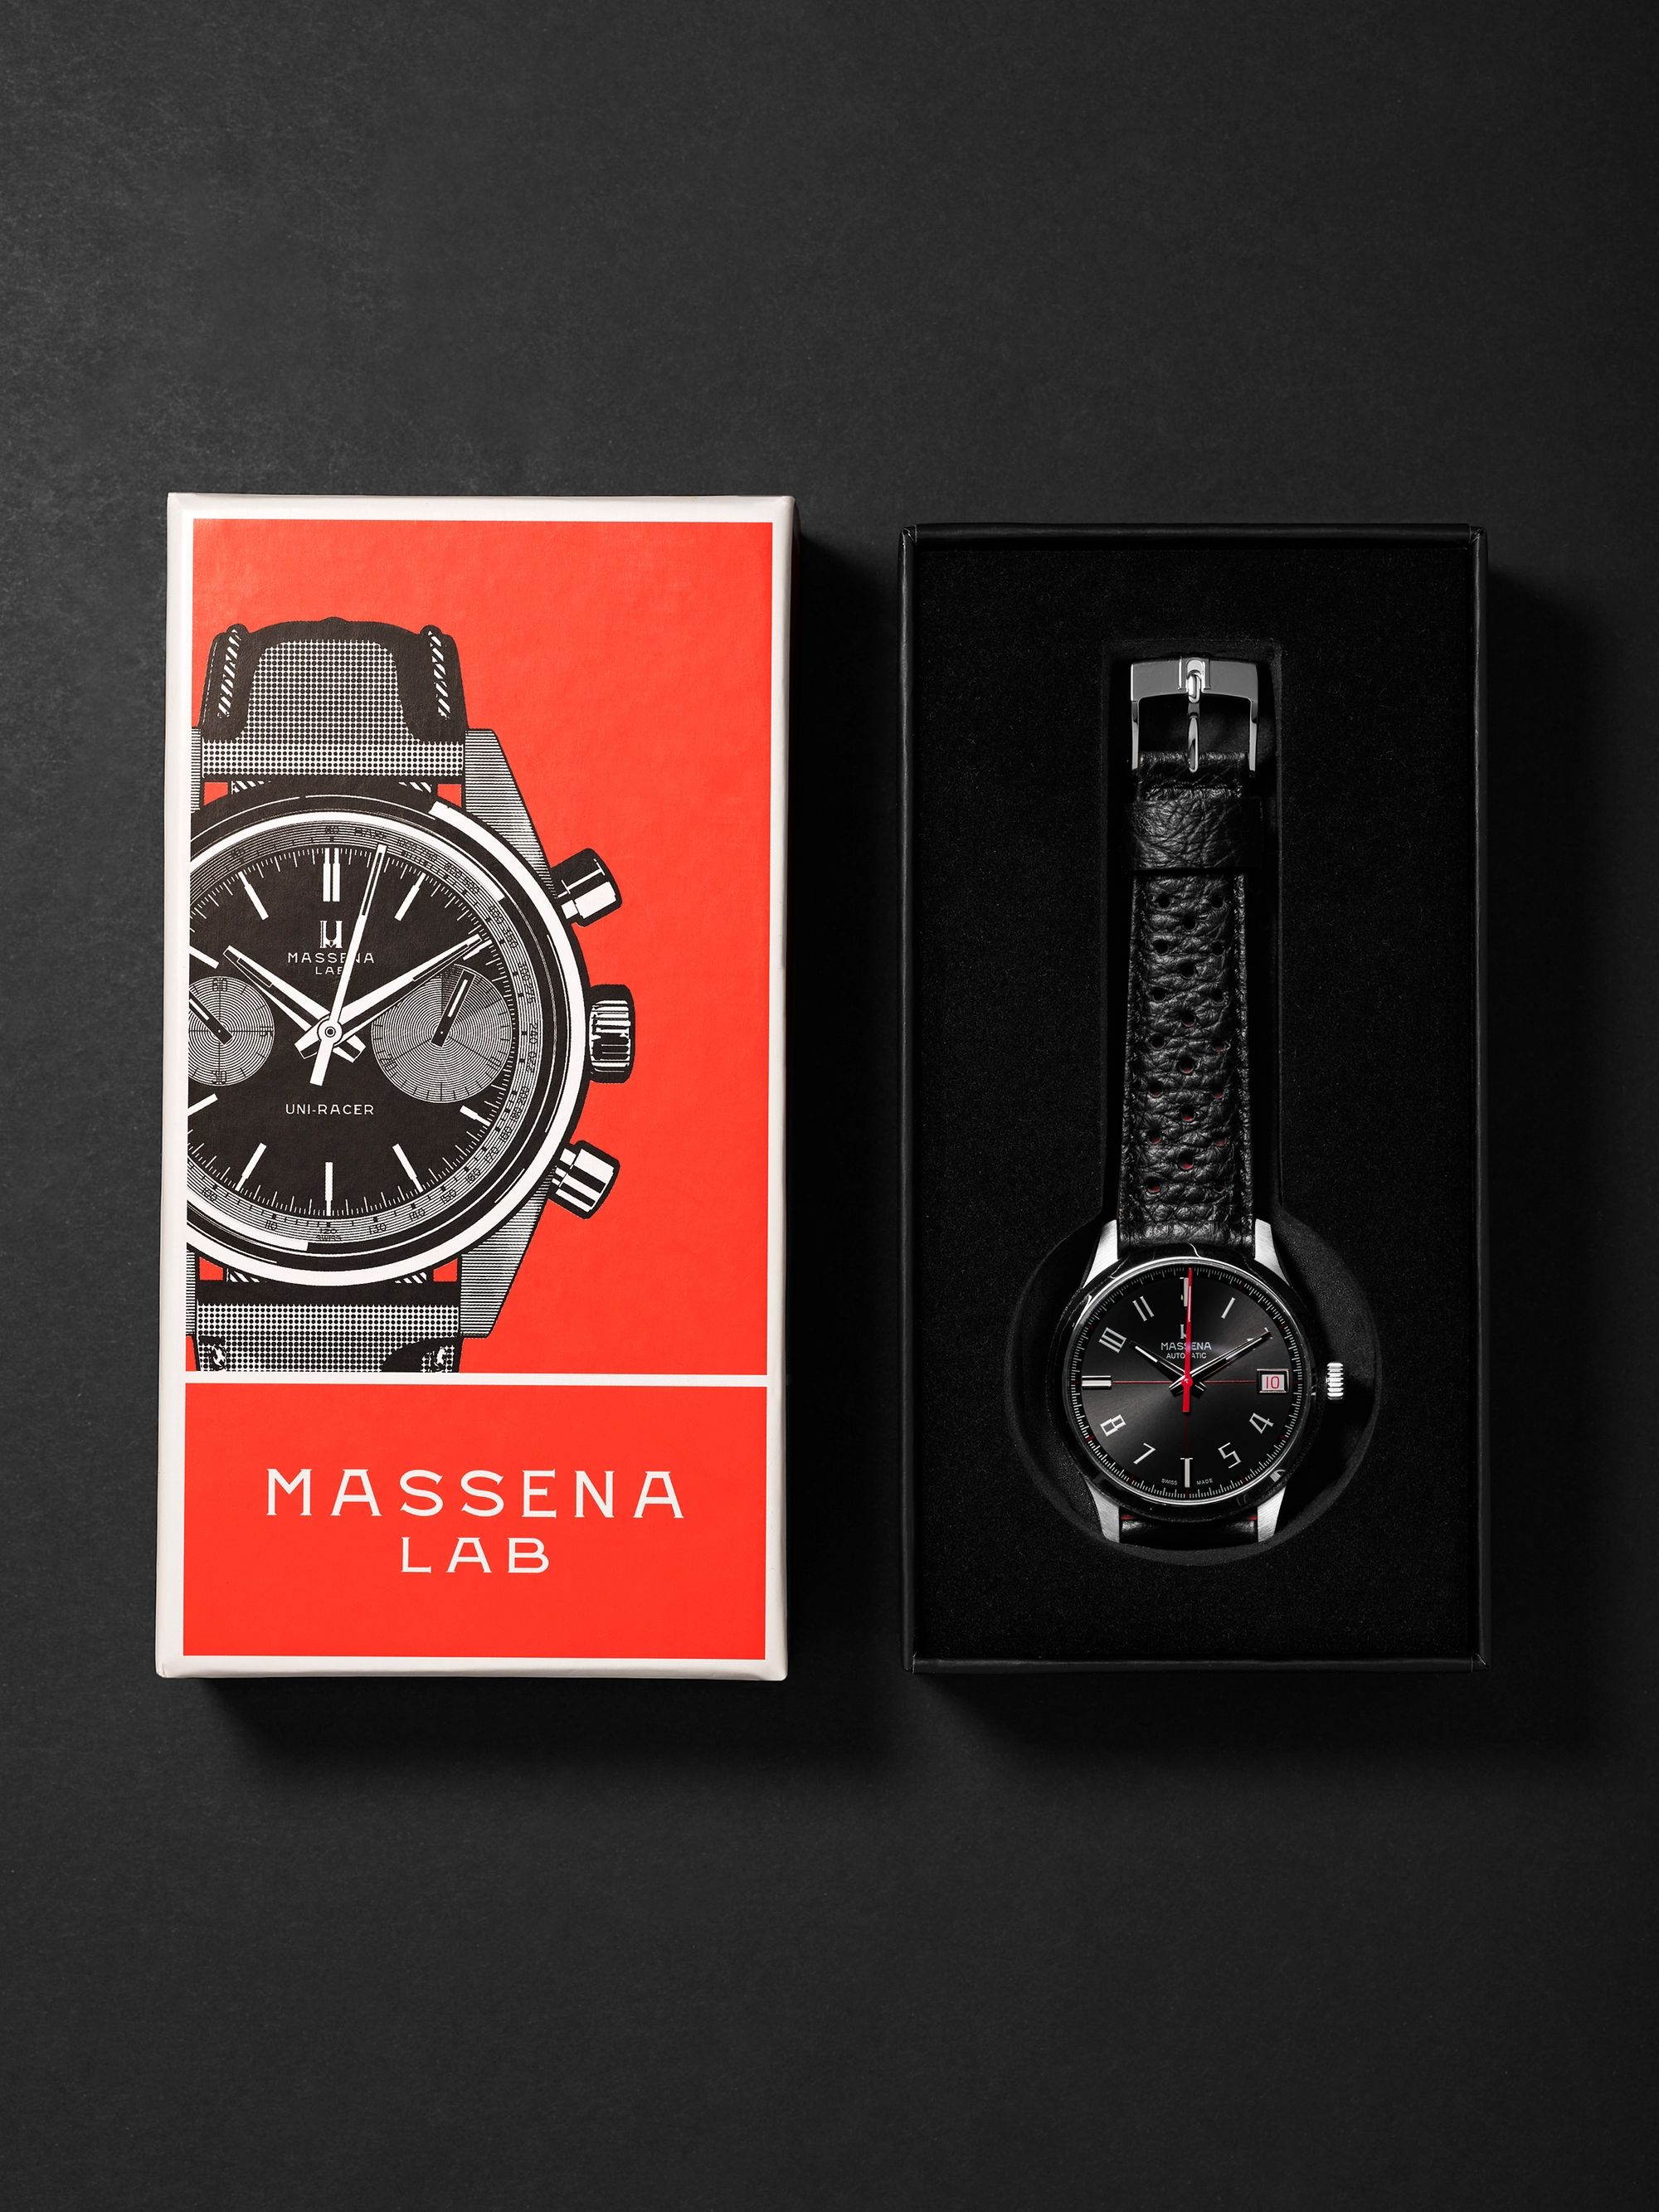 MASSENA LAB Dato-Racer Limited Edition Automatic 40mm Stainless Steel and Full-Grain Leather Watch, Ref. No. DR-001